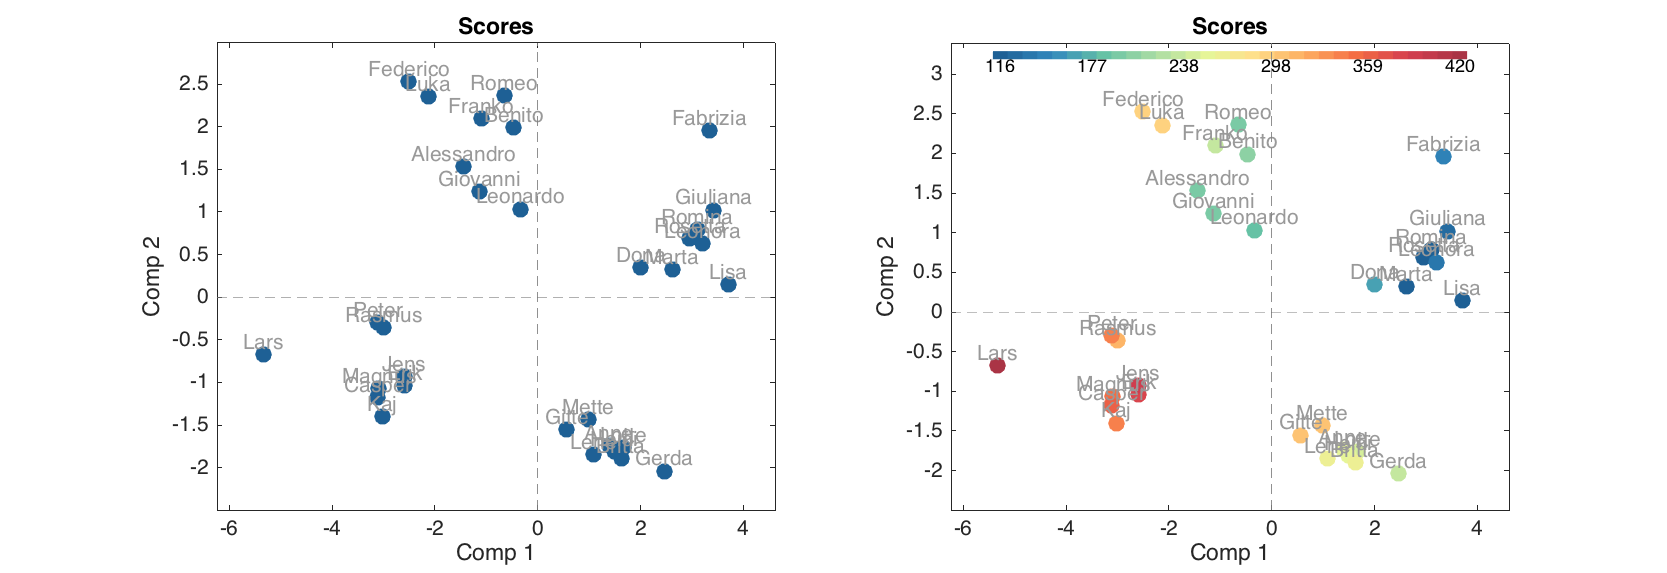 Normal scores plot (left) and one with color groups (right)